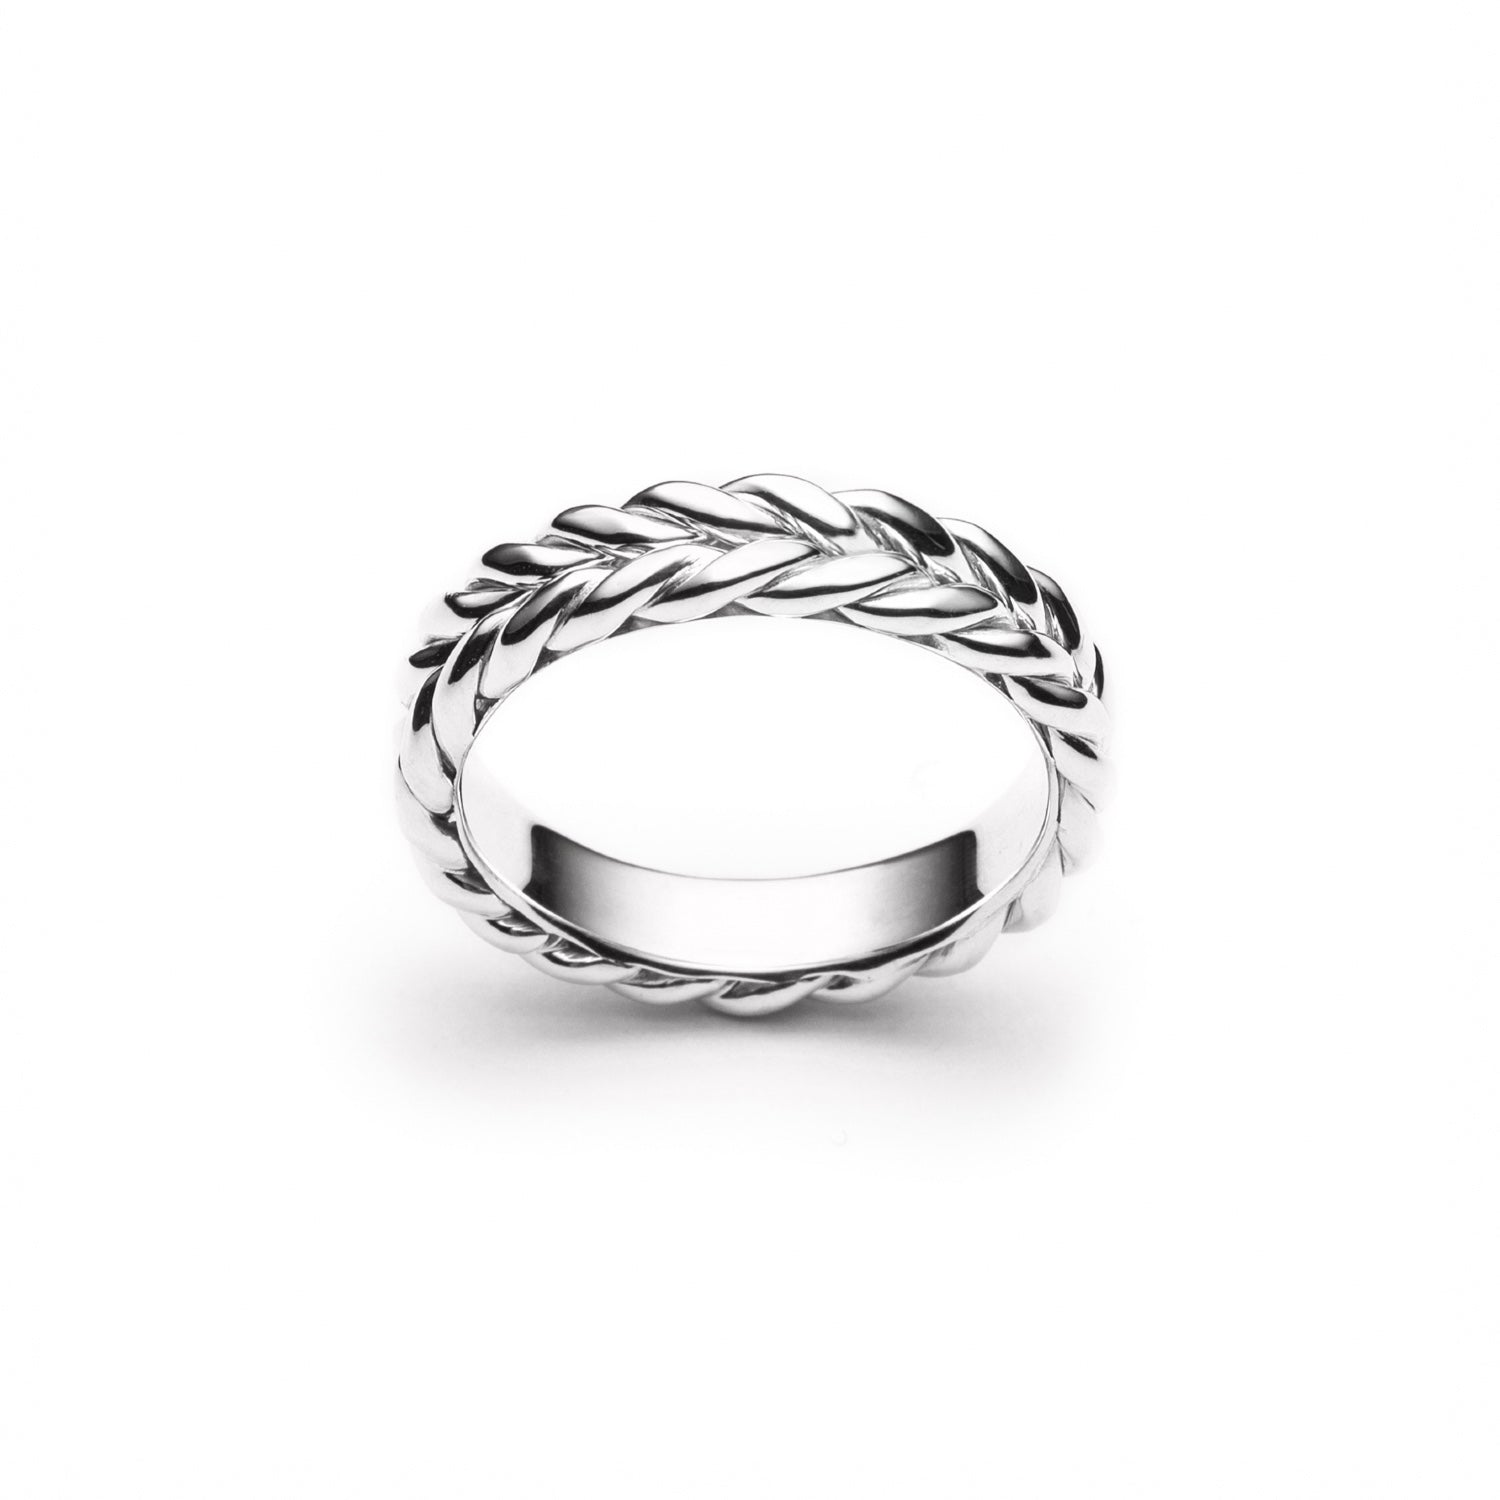 Signature Braided Polished Finish Standard Fit 8-9 mm Wedding Band in Platinum